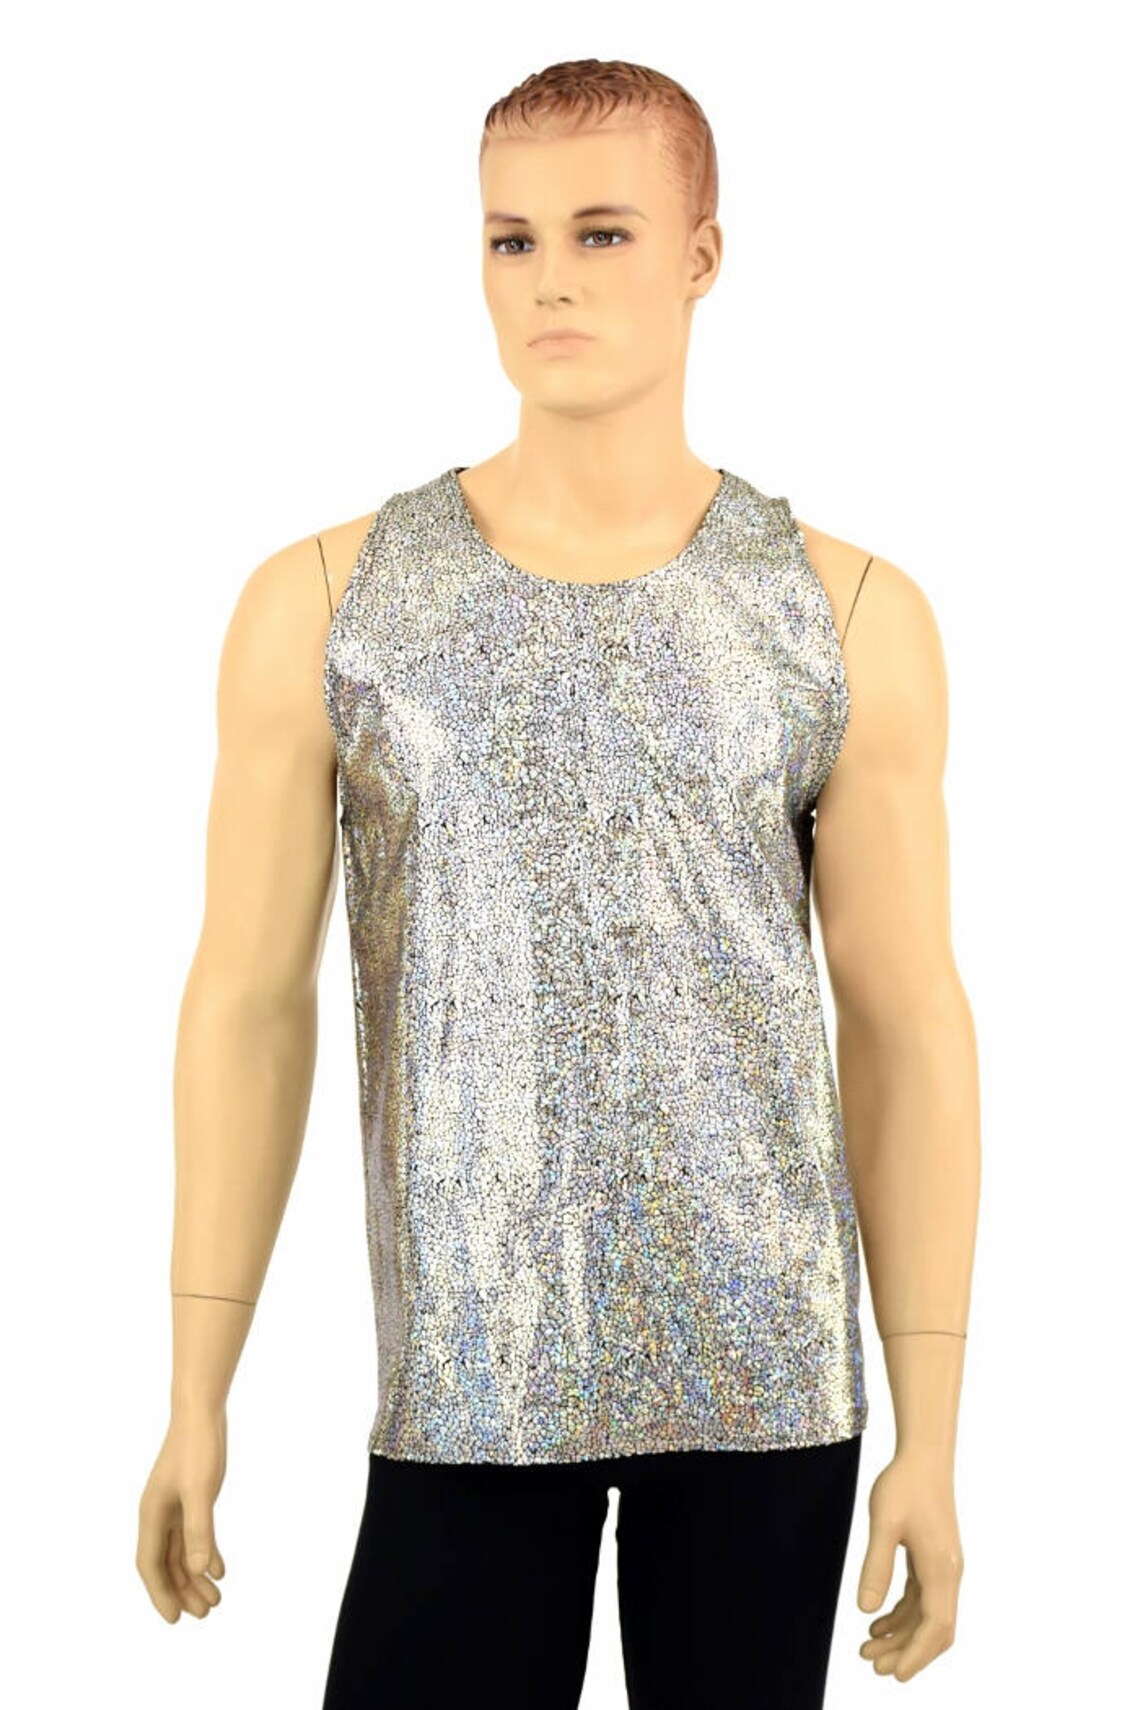 Mens Silver on Black Shattered Glass Holographic Muscle Shirt - Etsy